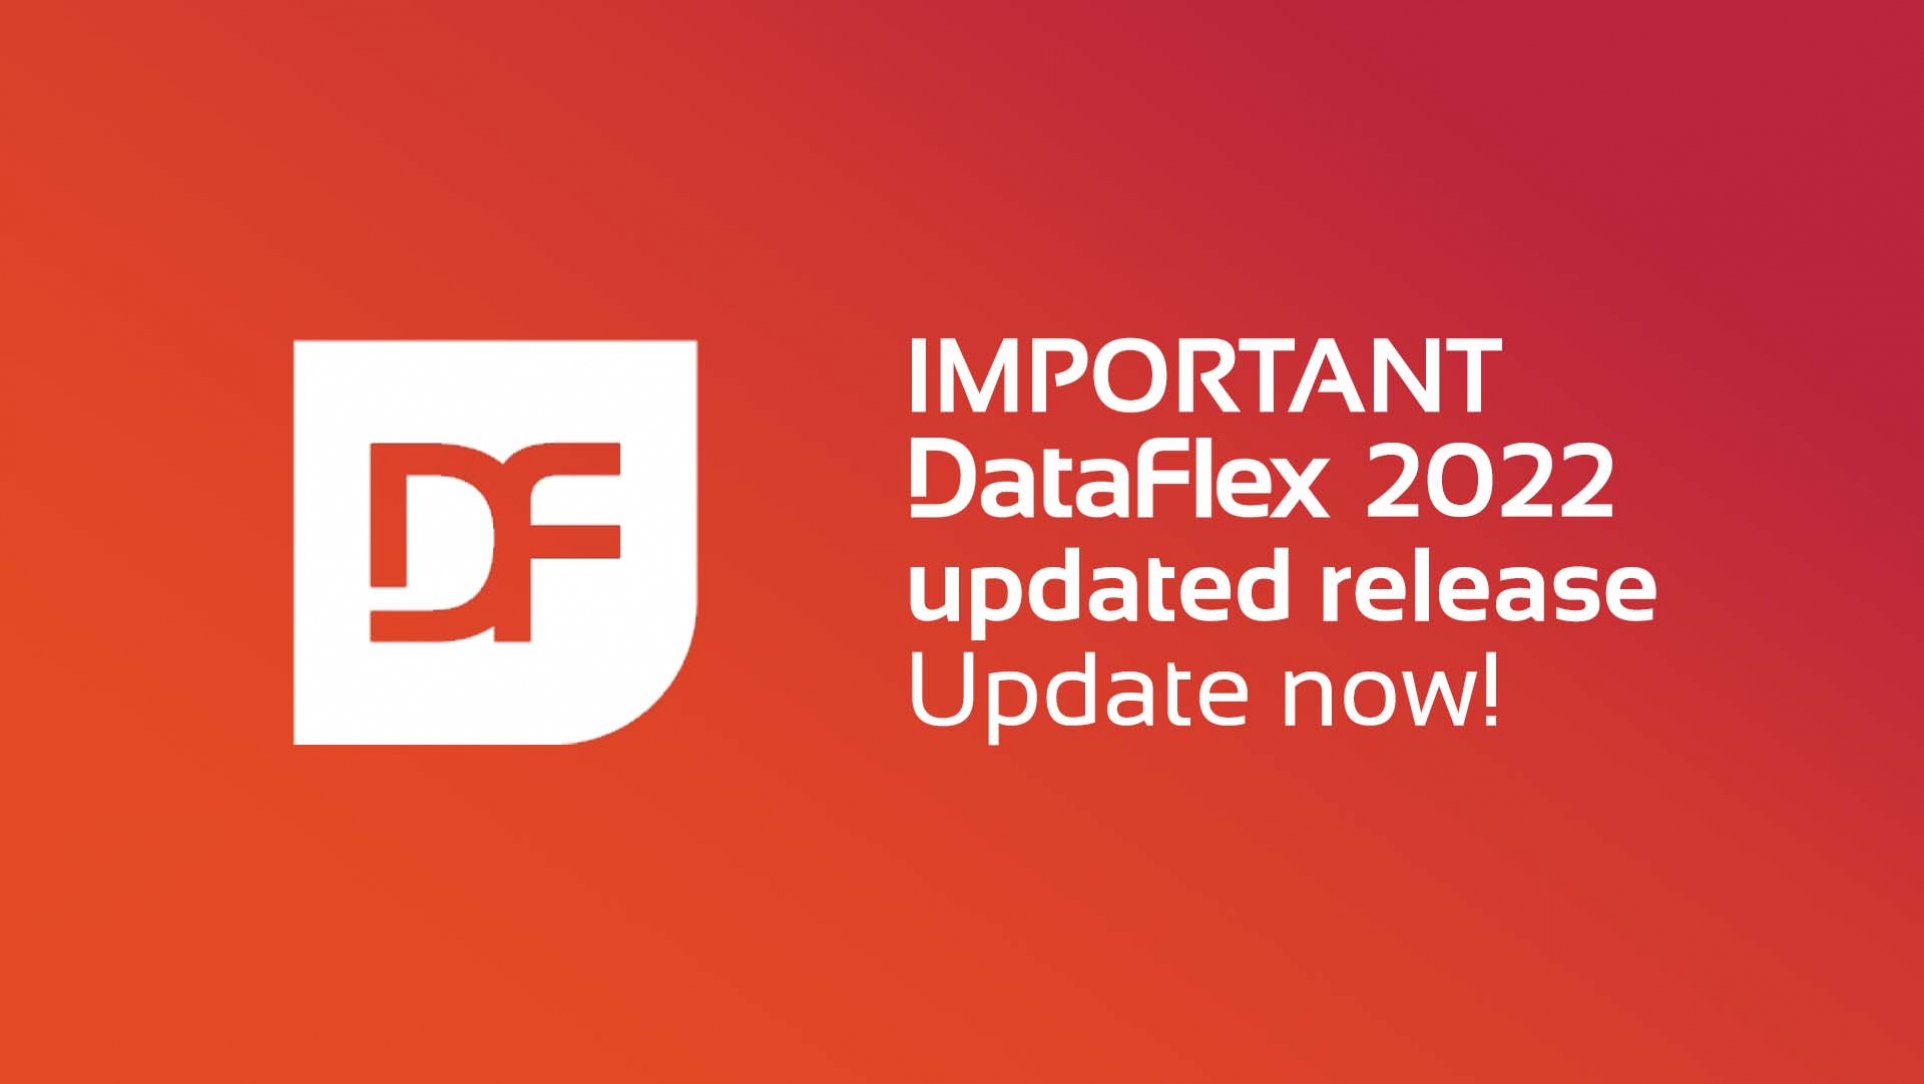 Important Updated DataFlex Release Published